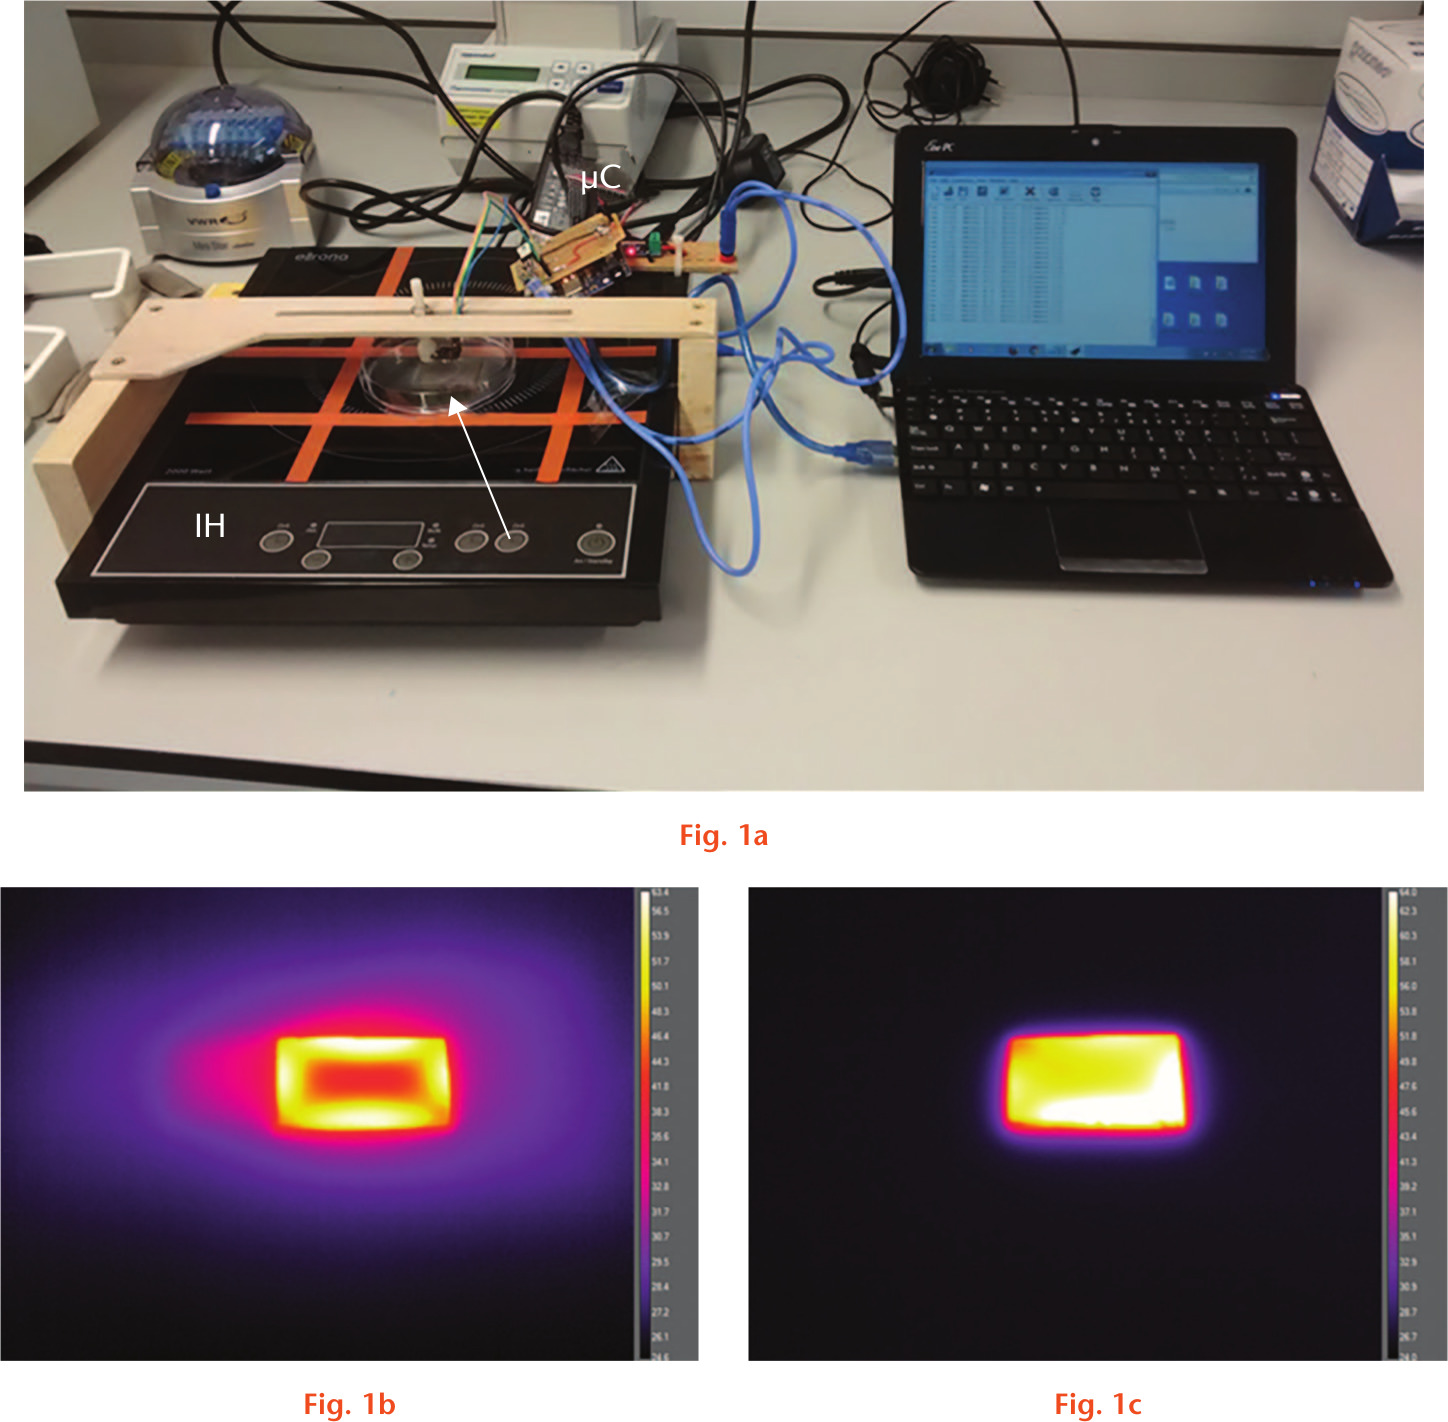 Fig. 1 
            a) Photograph of the arrangement of the induction systems and a titanium alloy (Ti6Al4V) coupon in a Petri dish. An arrow shows the Ti6Al4V coupon with biofilm and the infrared temperature sensor directly above it for non-contact temperature measurements. b) Thermal image showing heat distribution before using study heating protocol. c) Thermal image showing heat distribution after using study heating protocol. IH, induction heat for non-contact heating; µC, micro-controller for temperature control and communication (data logging) with the laptop.
          